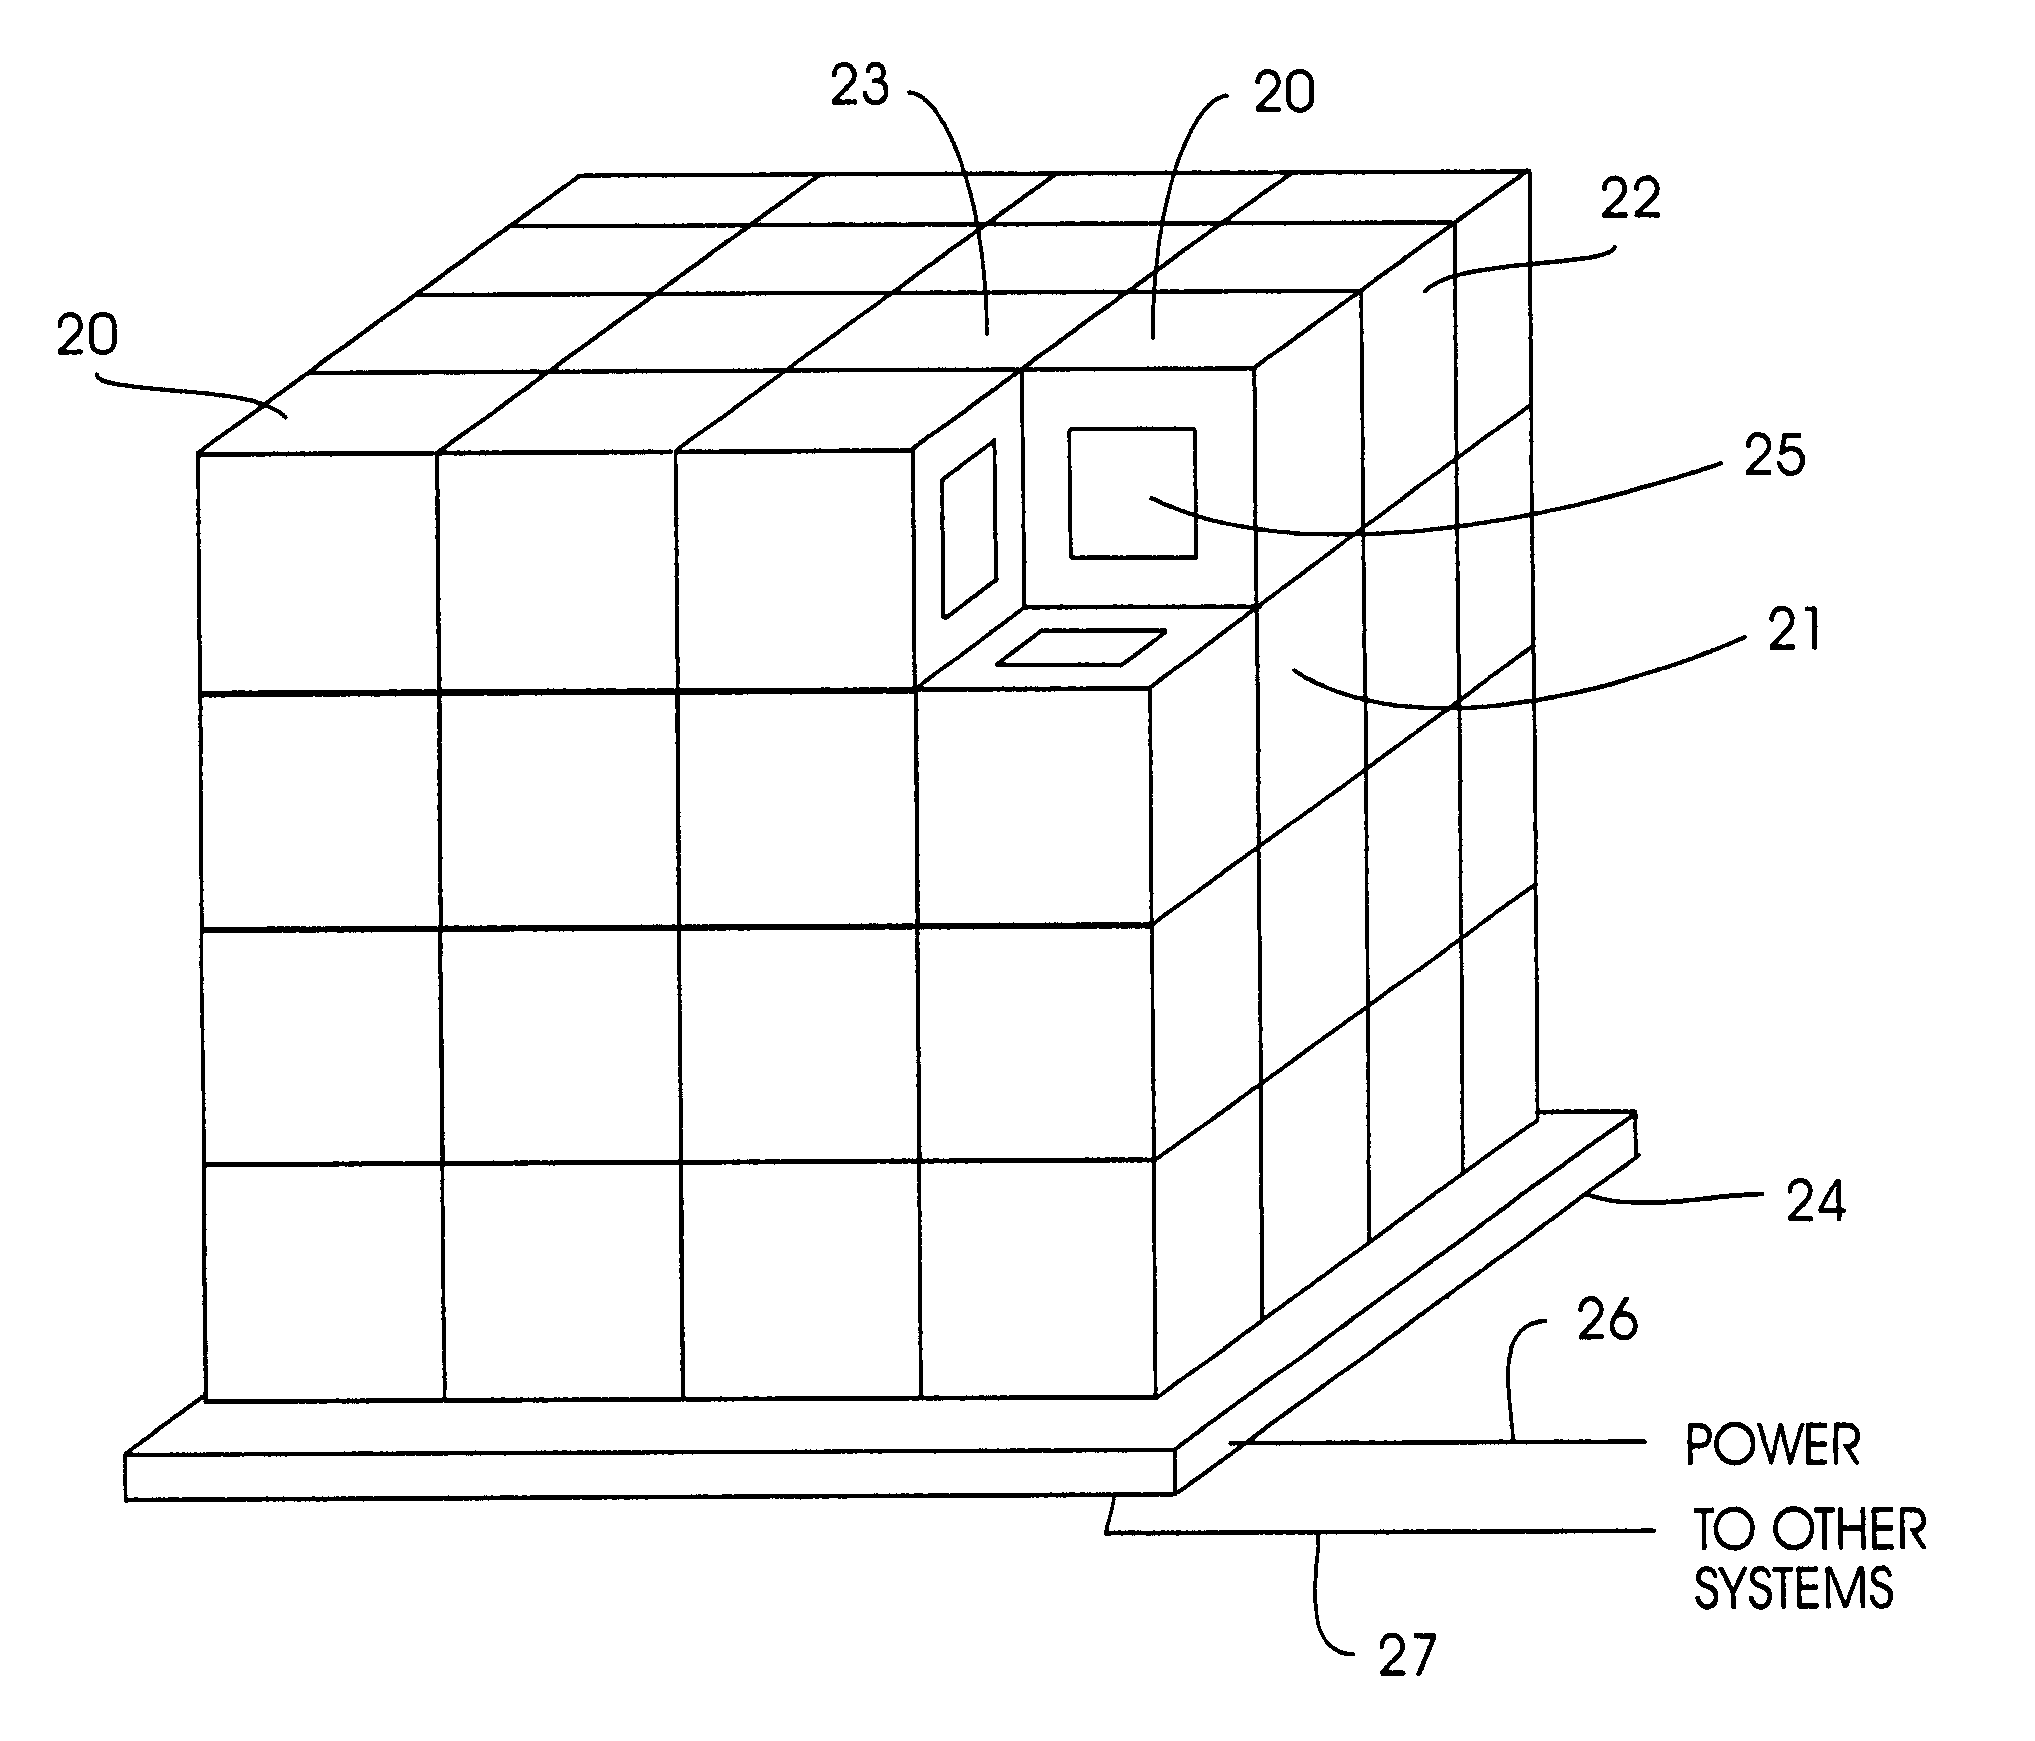 Scalable computer system having surface-mounted capacitive couplers for intercommunication